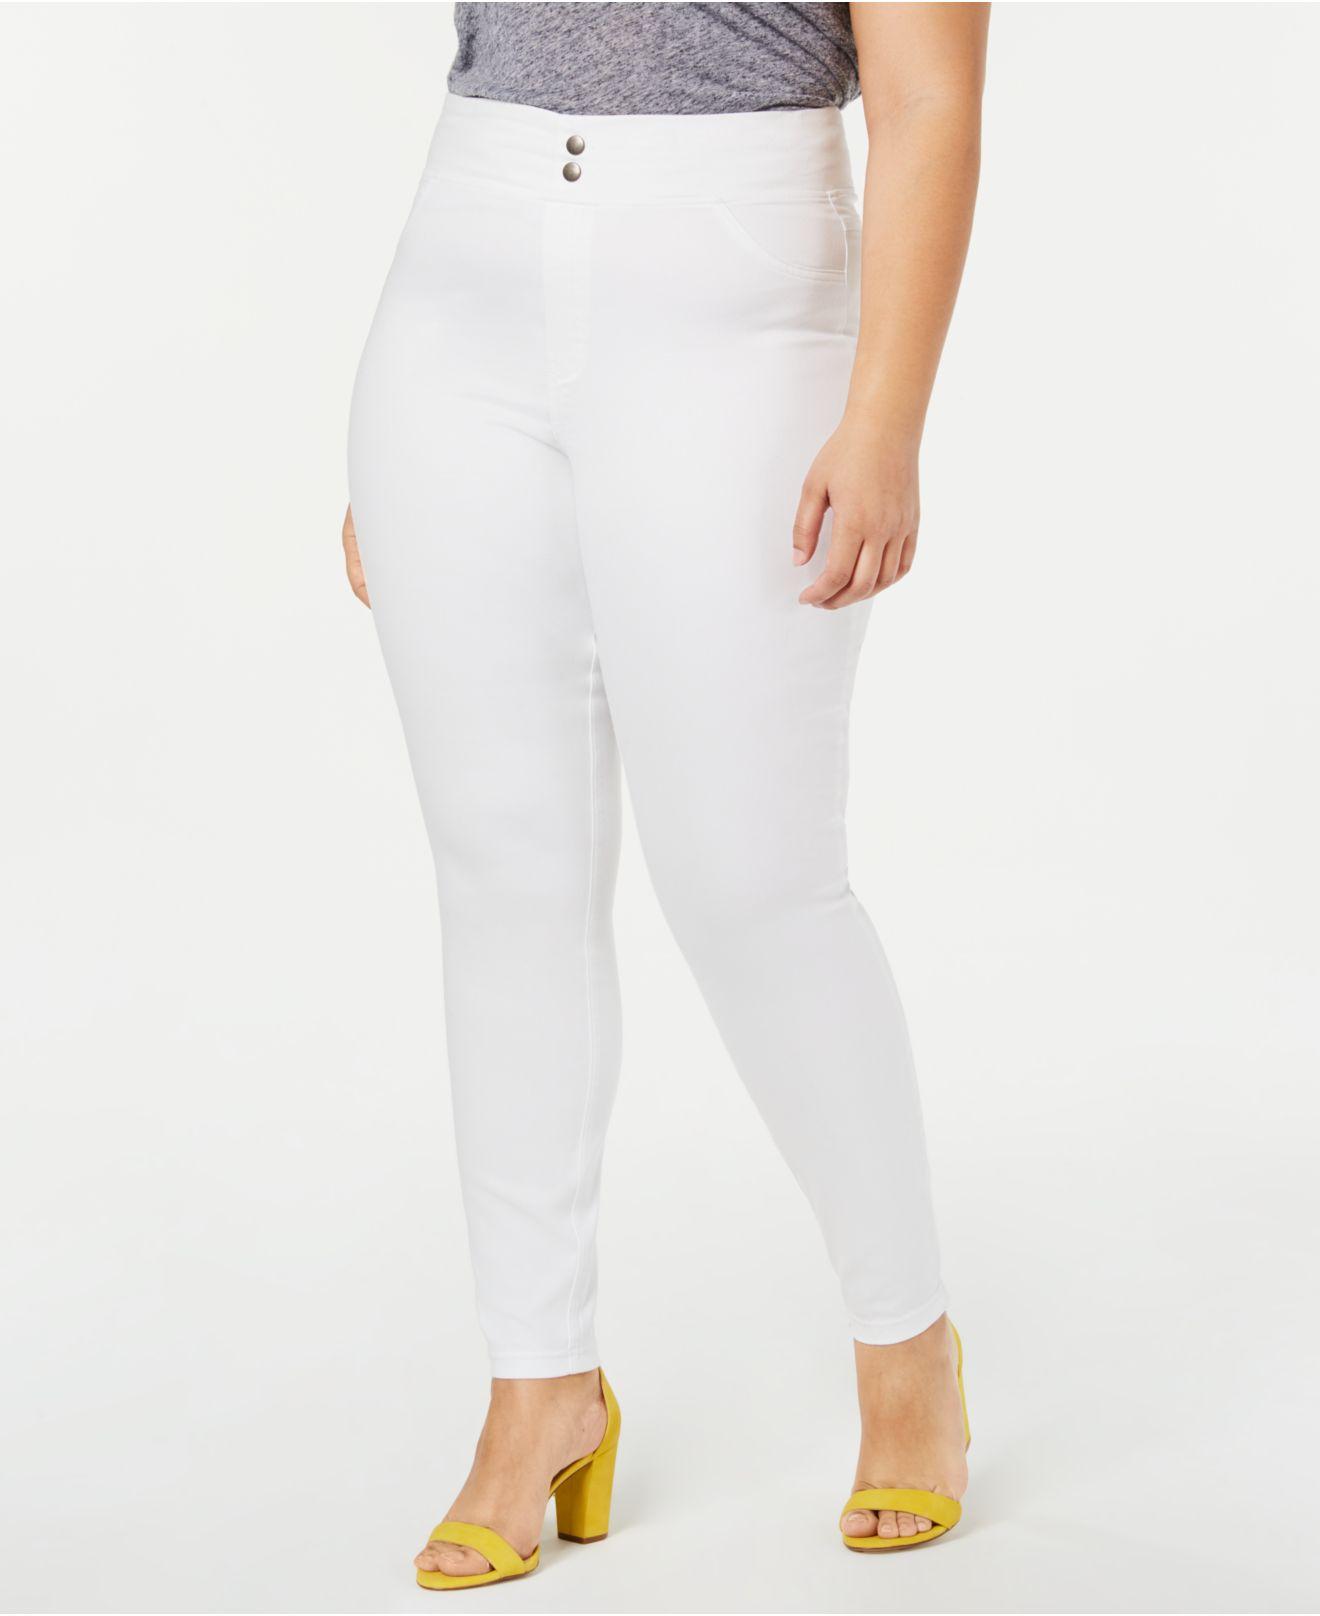 HUE Womens Plus Size Ultra Leggings With Wide Waistband Style-12665Q 